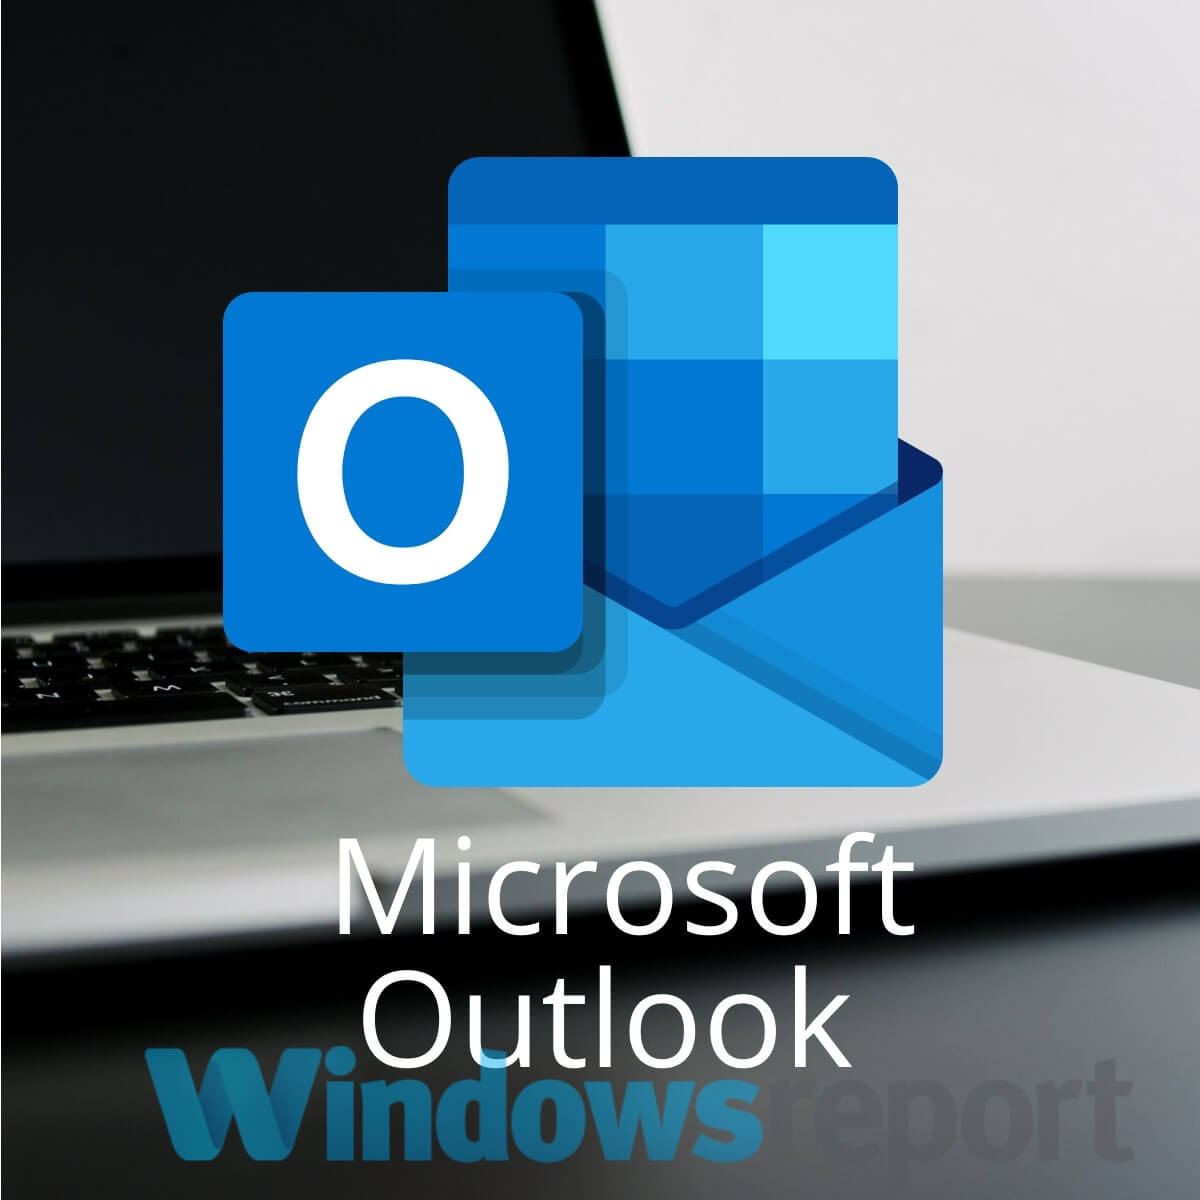 microsoft outlook email sign in